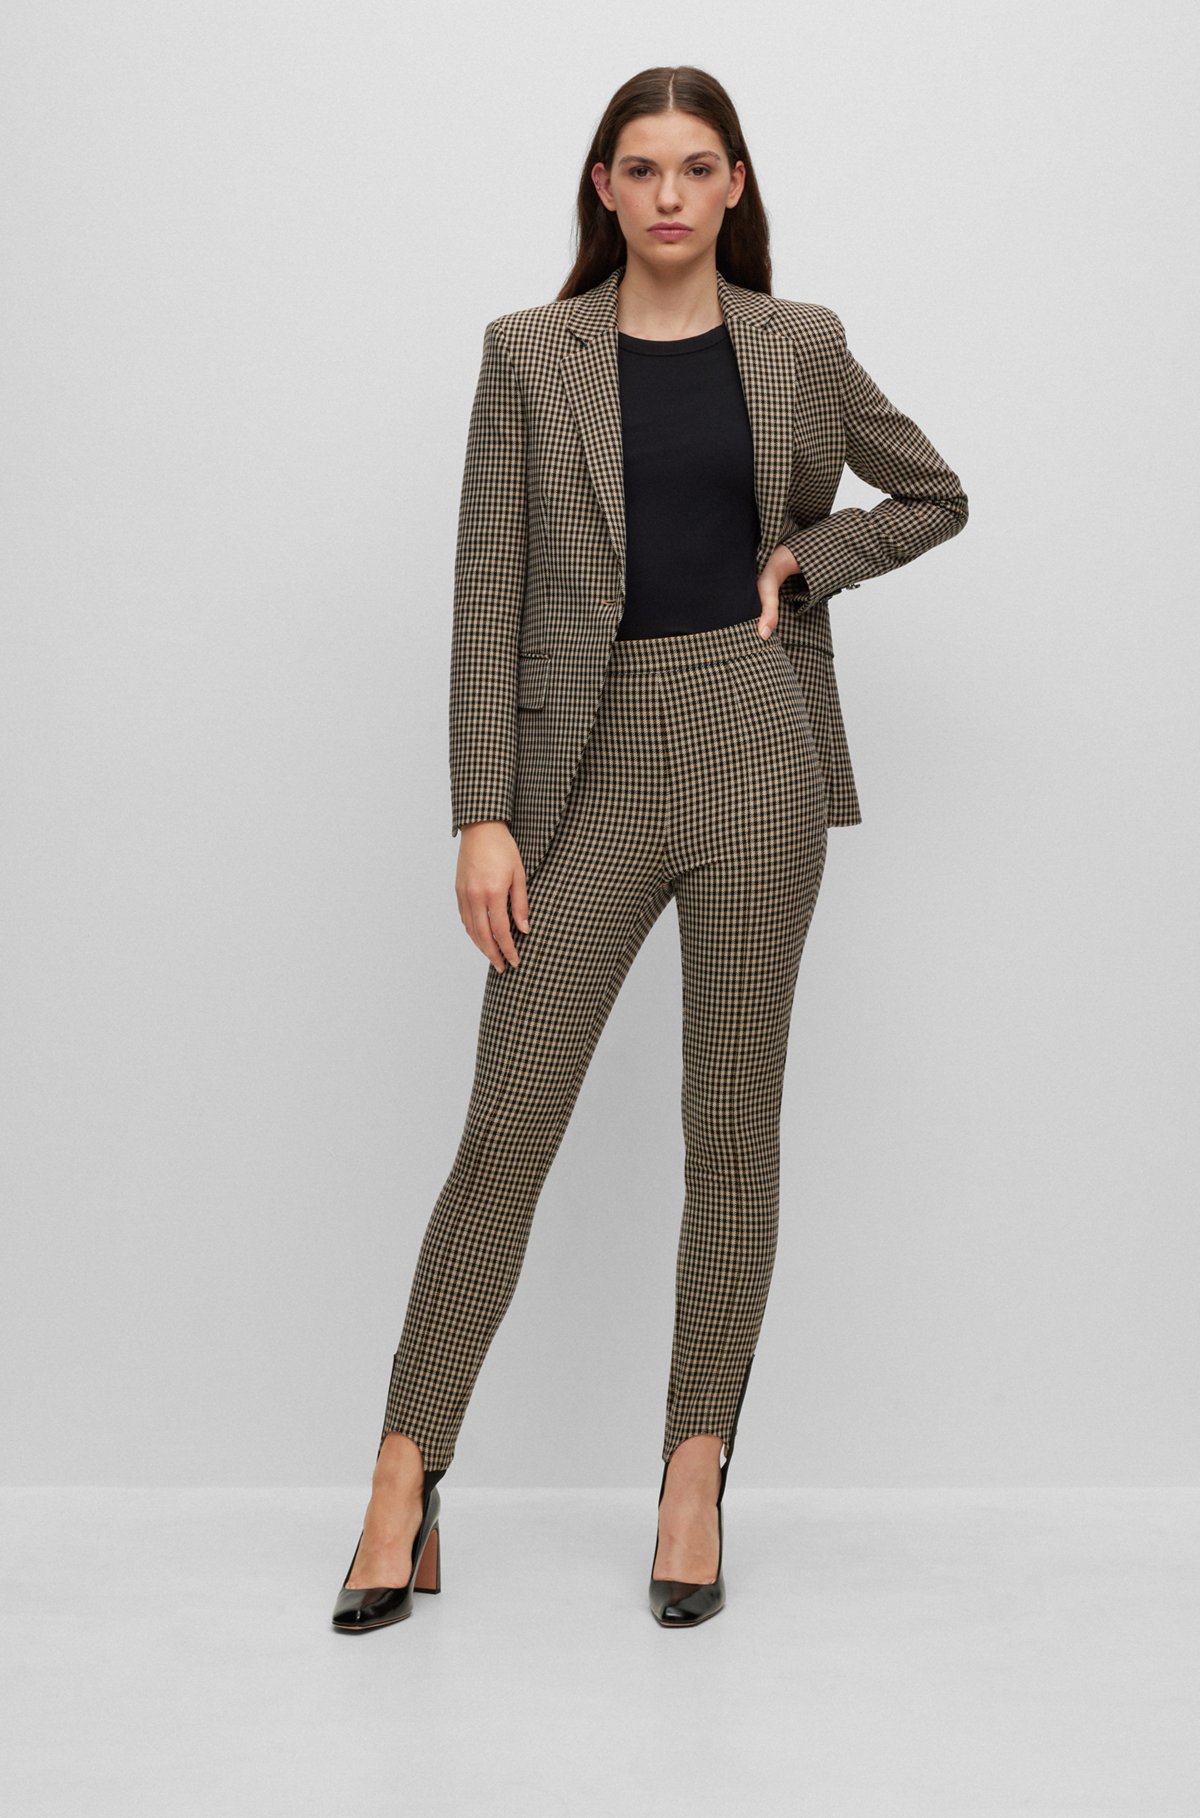 Slim-fit jacket in checked stretch fabric, Beige